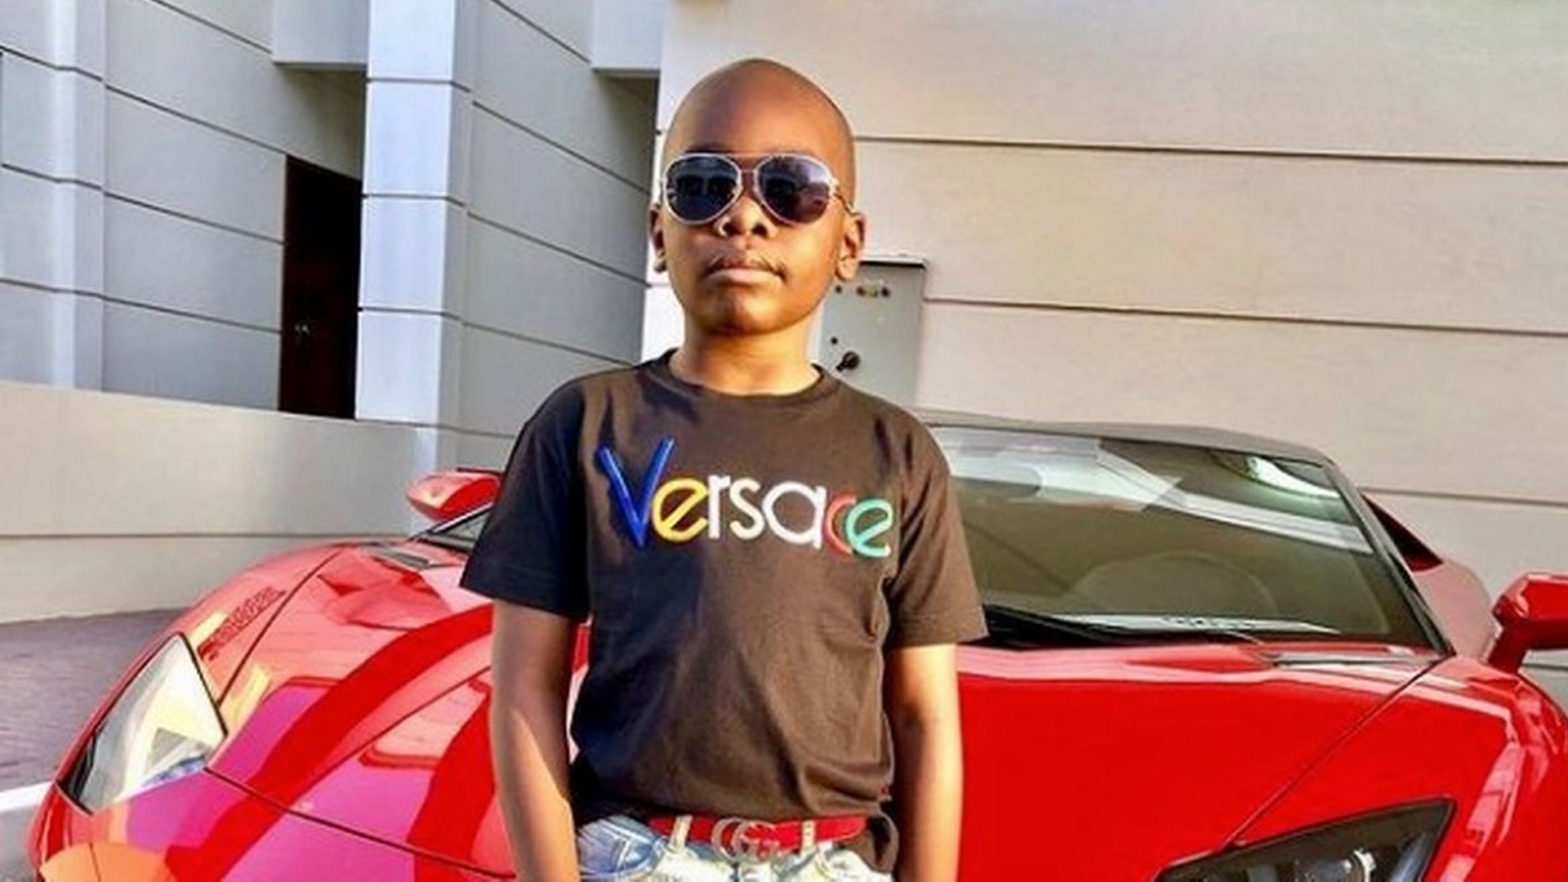 The Internet's Calling This 9-Year-Old 'The World's Youngest Billionaire' — Here's What We Know About The Claim